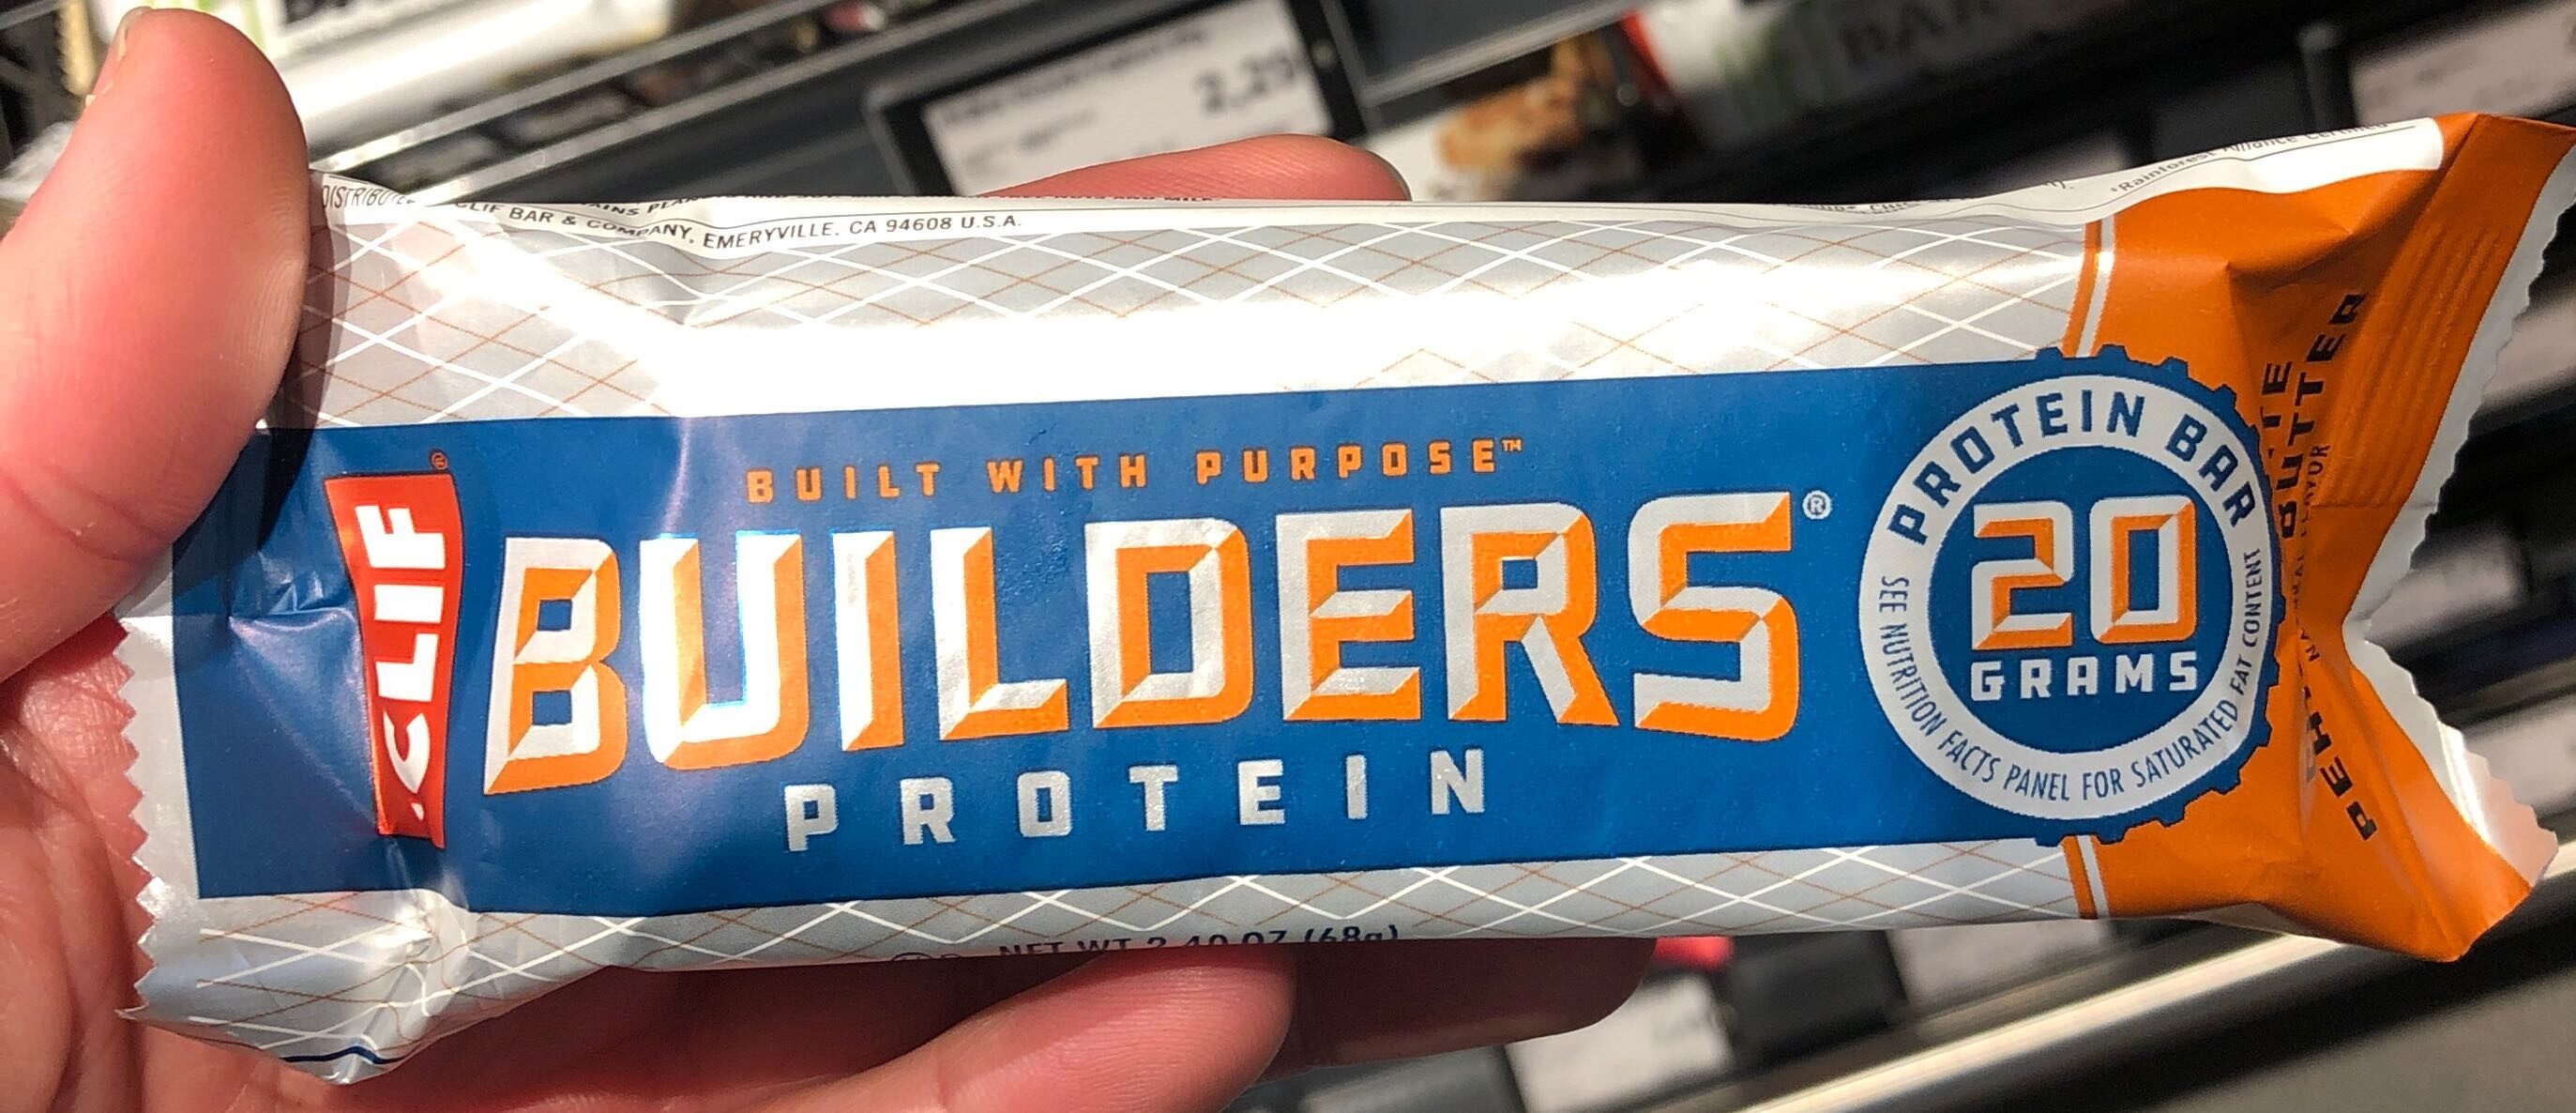 Proteinriegel - Product